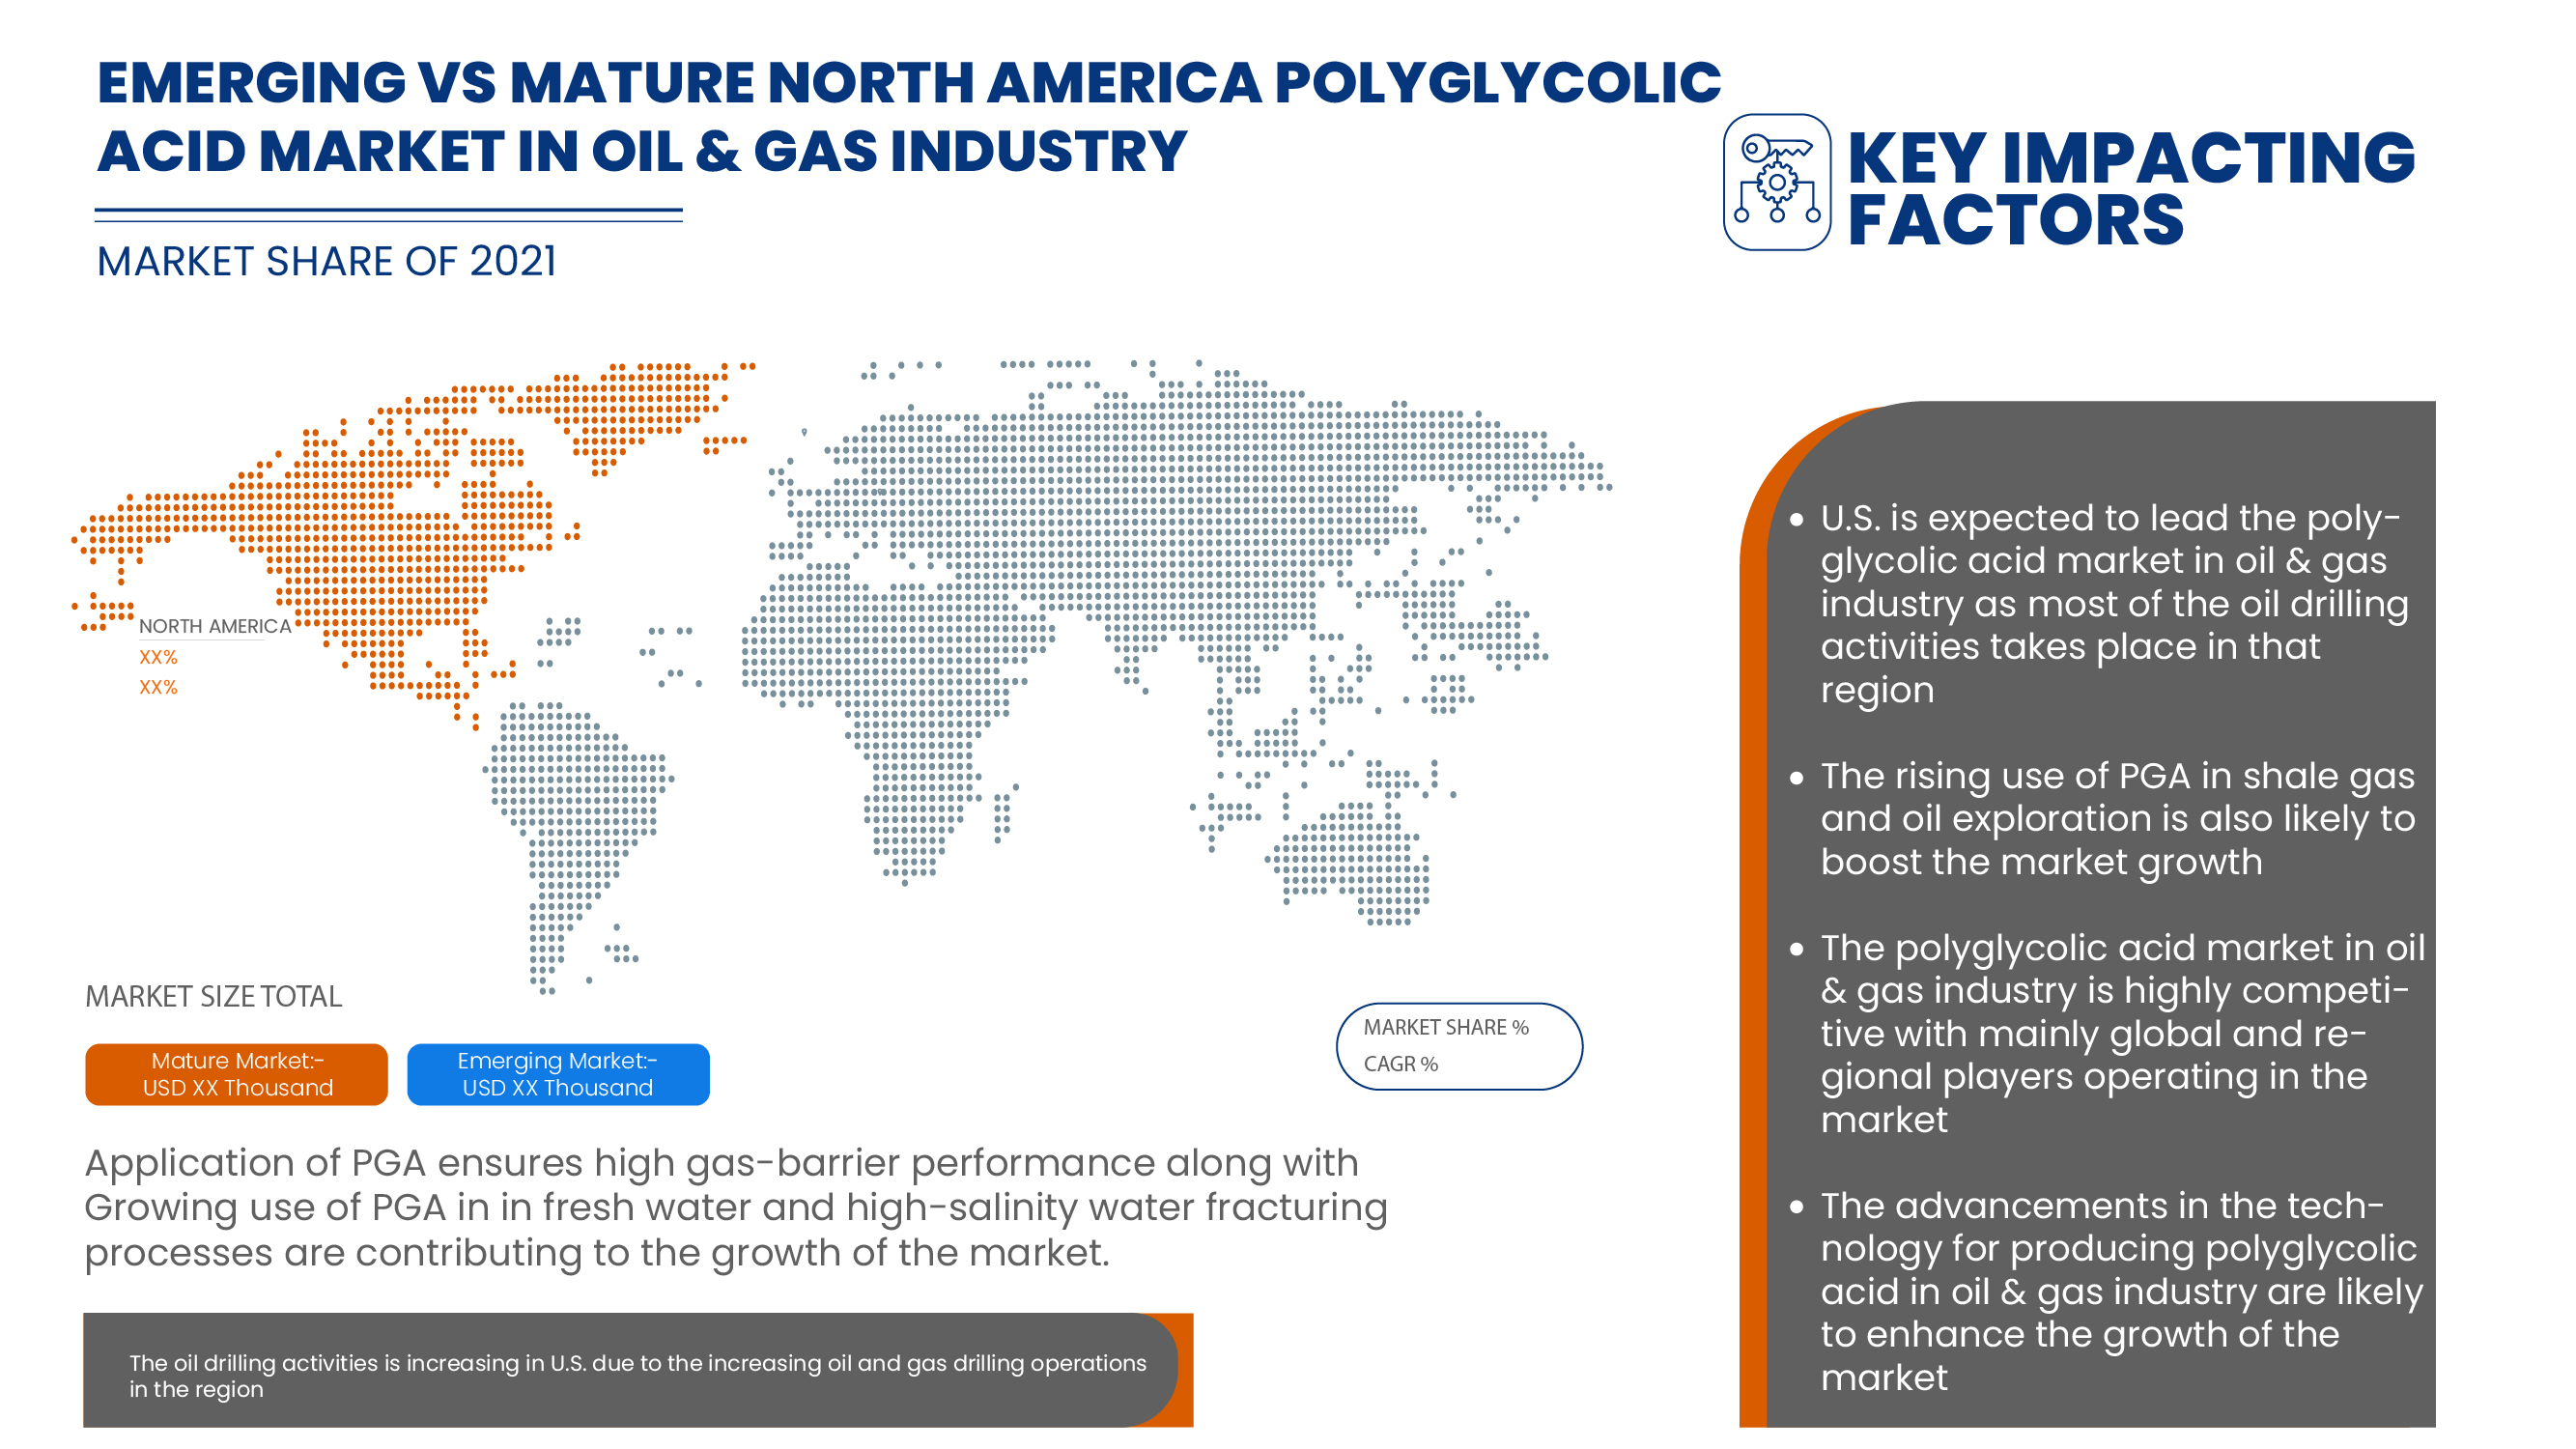 Global Polyglycolic Acid Market in Oil and Gas industry